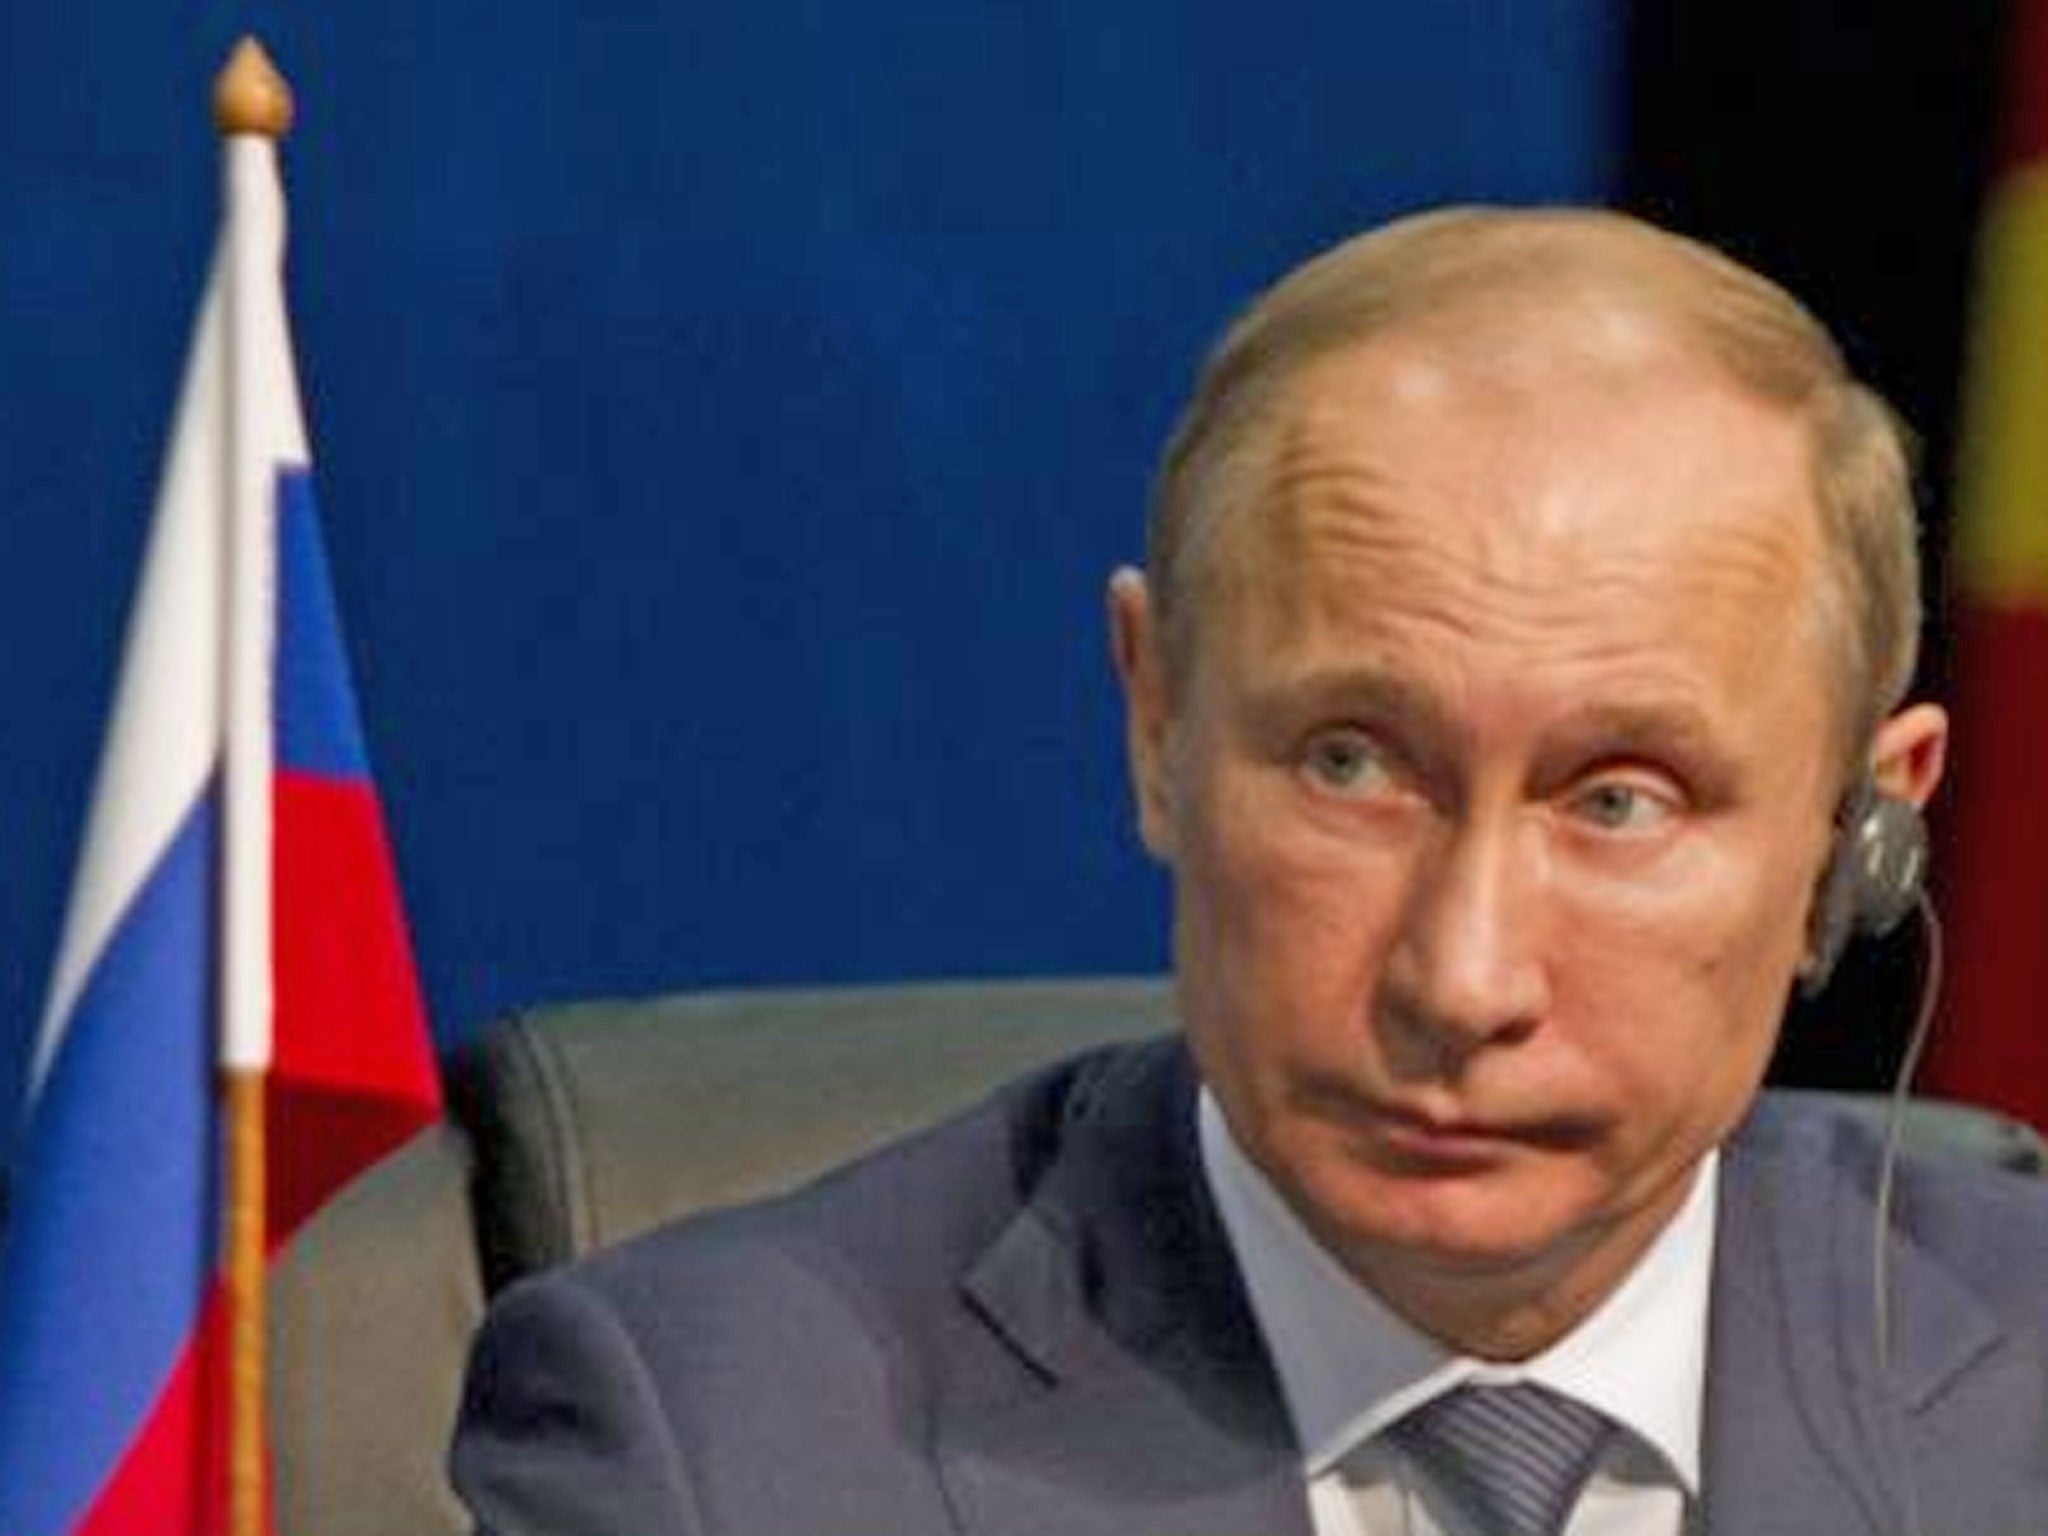 Putin has been suspended by the IJF